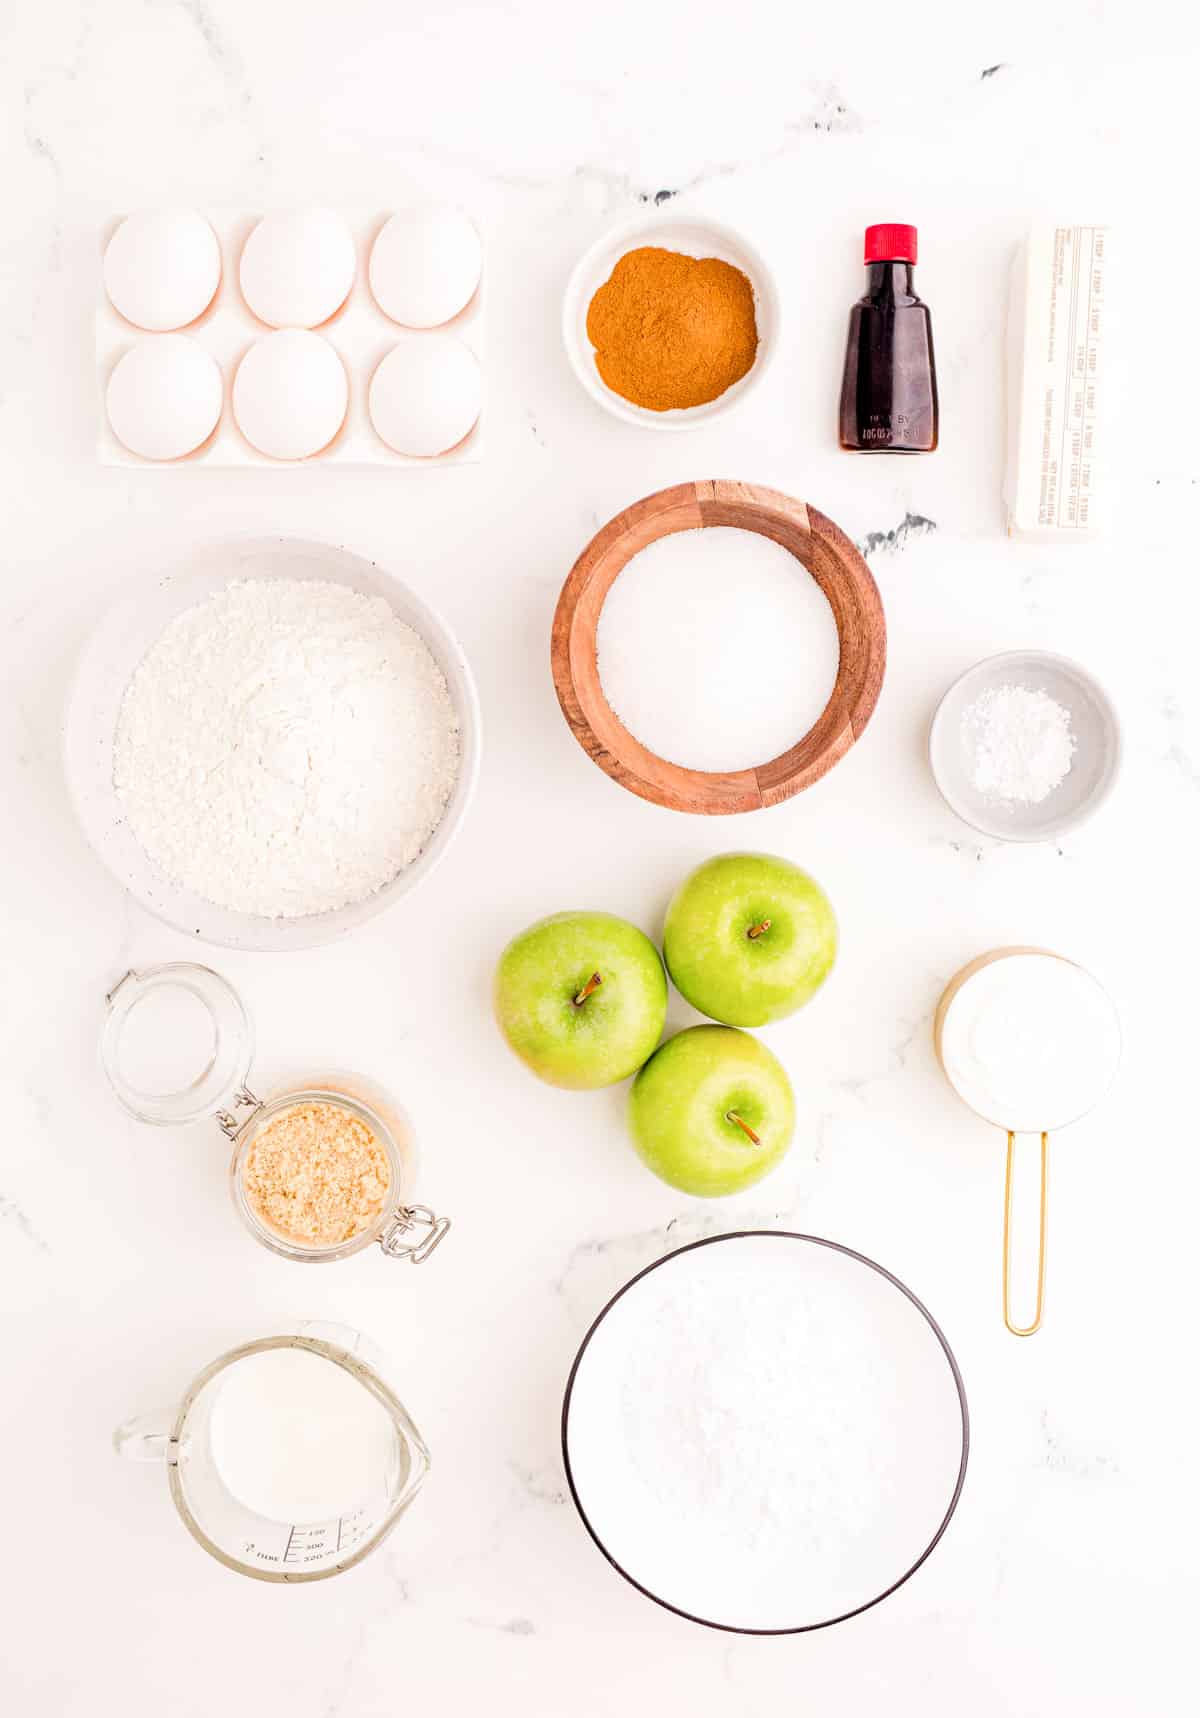 Ingredients to make apple fritter bread prepared on a marble surface.